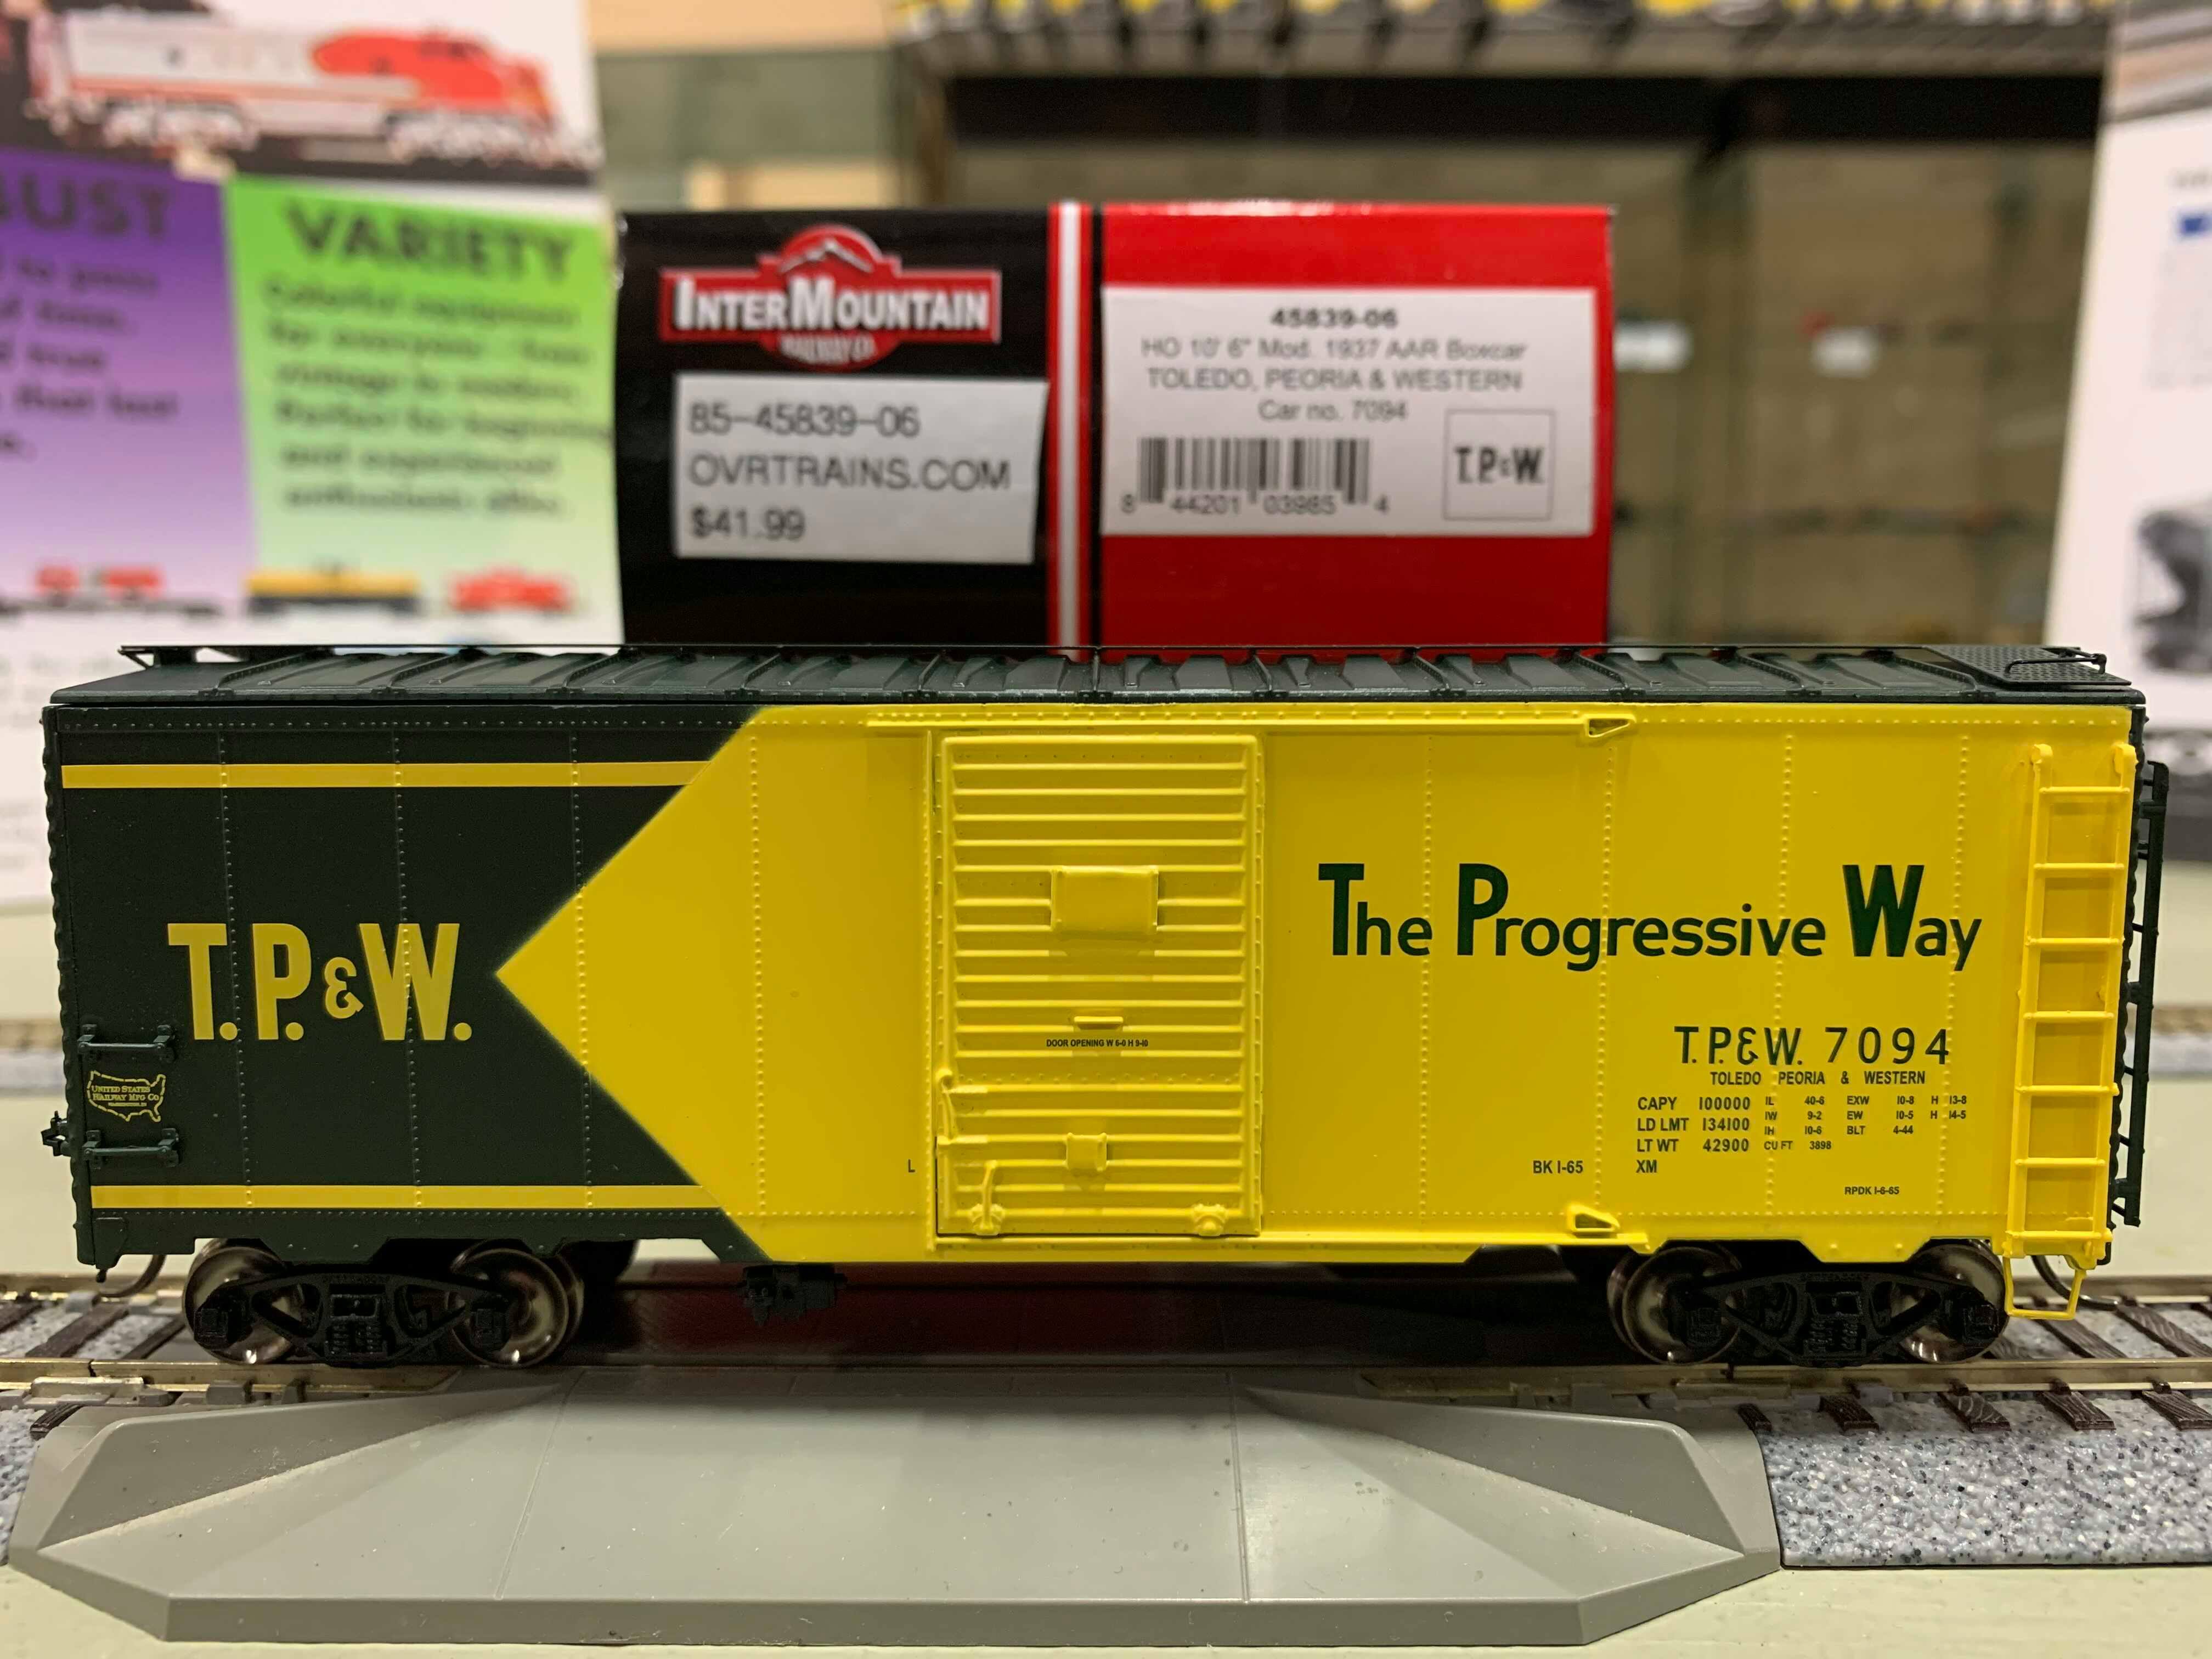 Intermountain 45839-01 HO Scale - 10Ft 6In Modified 1937 AAR Boxcar - Toledo, Peoria & Western #7009